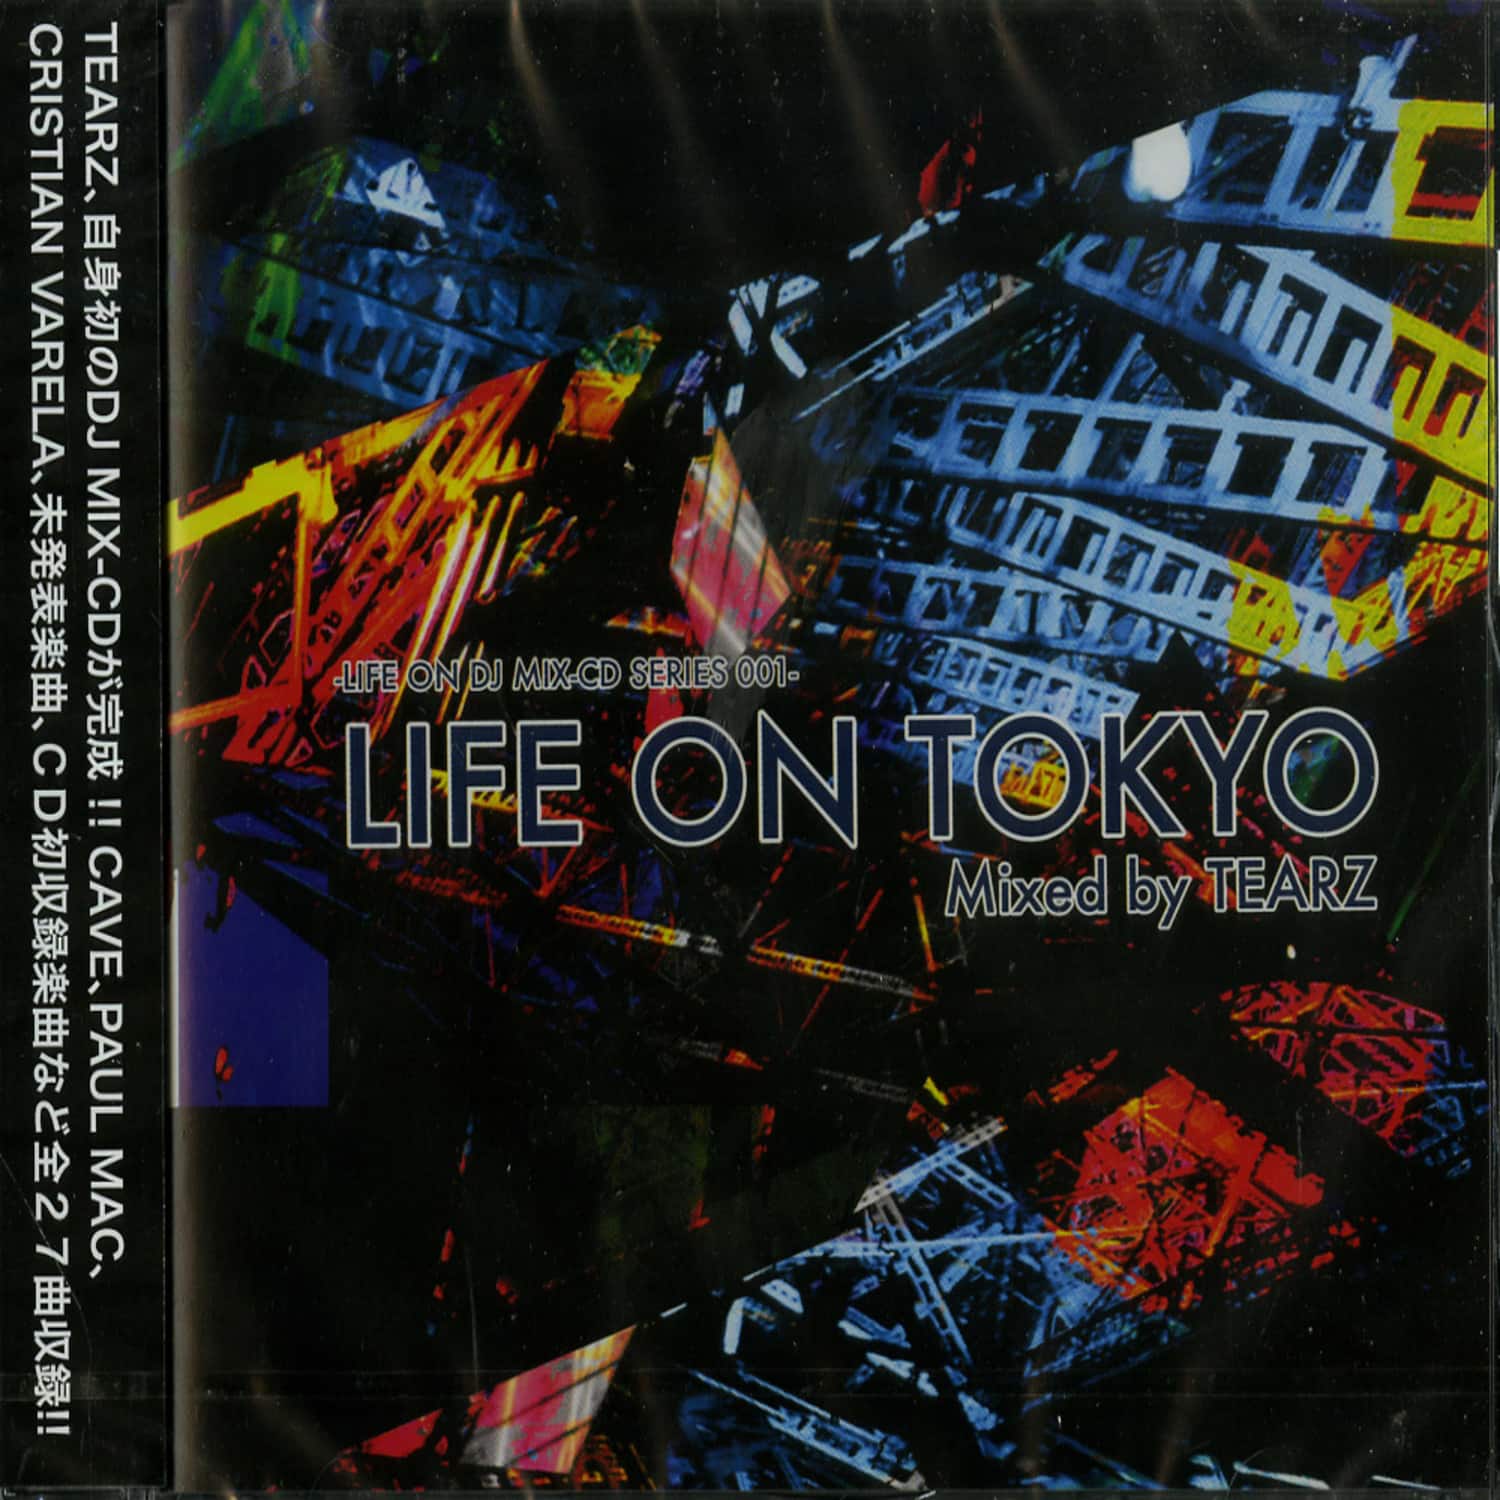 Various mixed by Tearz - LIFE ON TOKYO MIXED BY TEARZ 